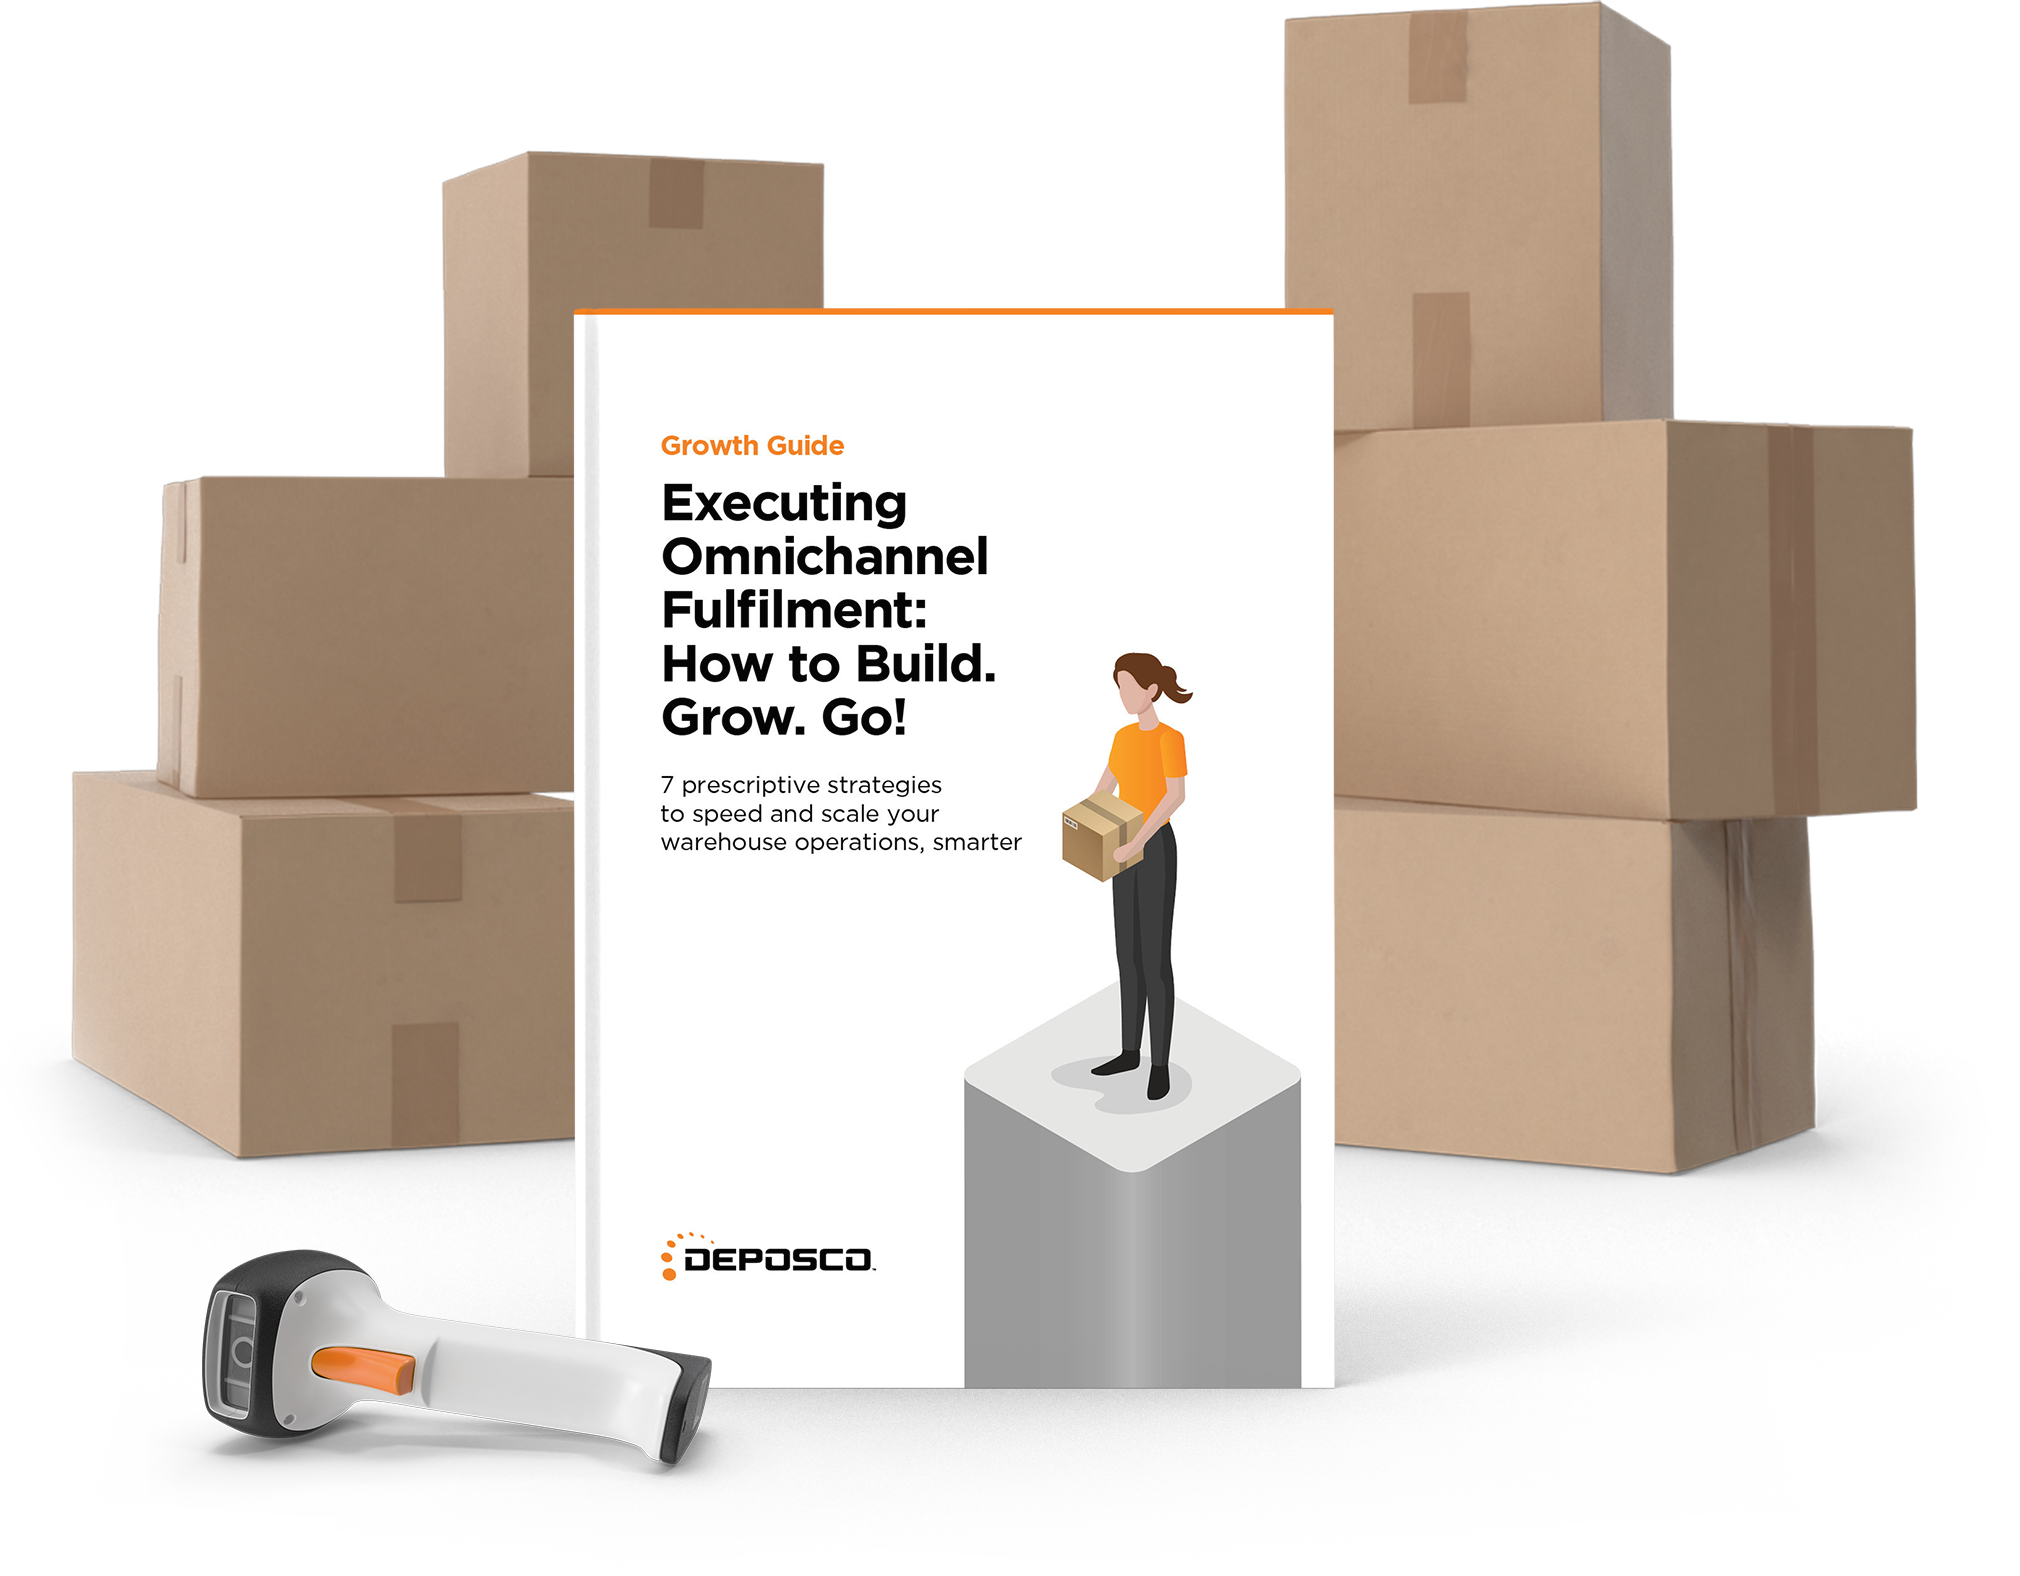 Executing Omnichannel Fulfilment: How to Build. Grow. Go!